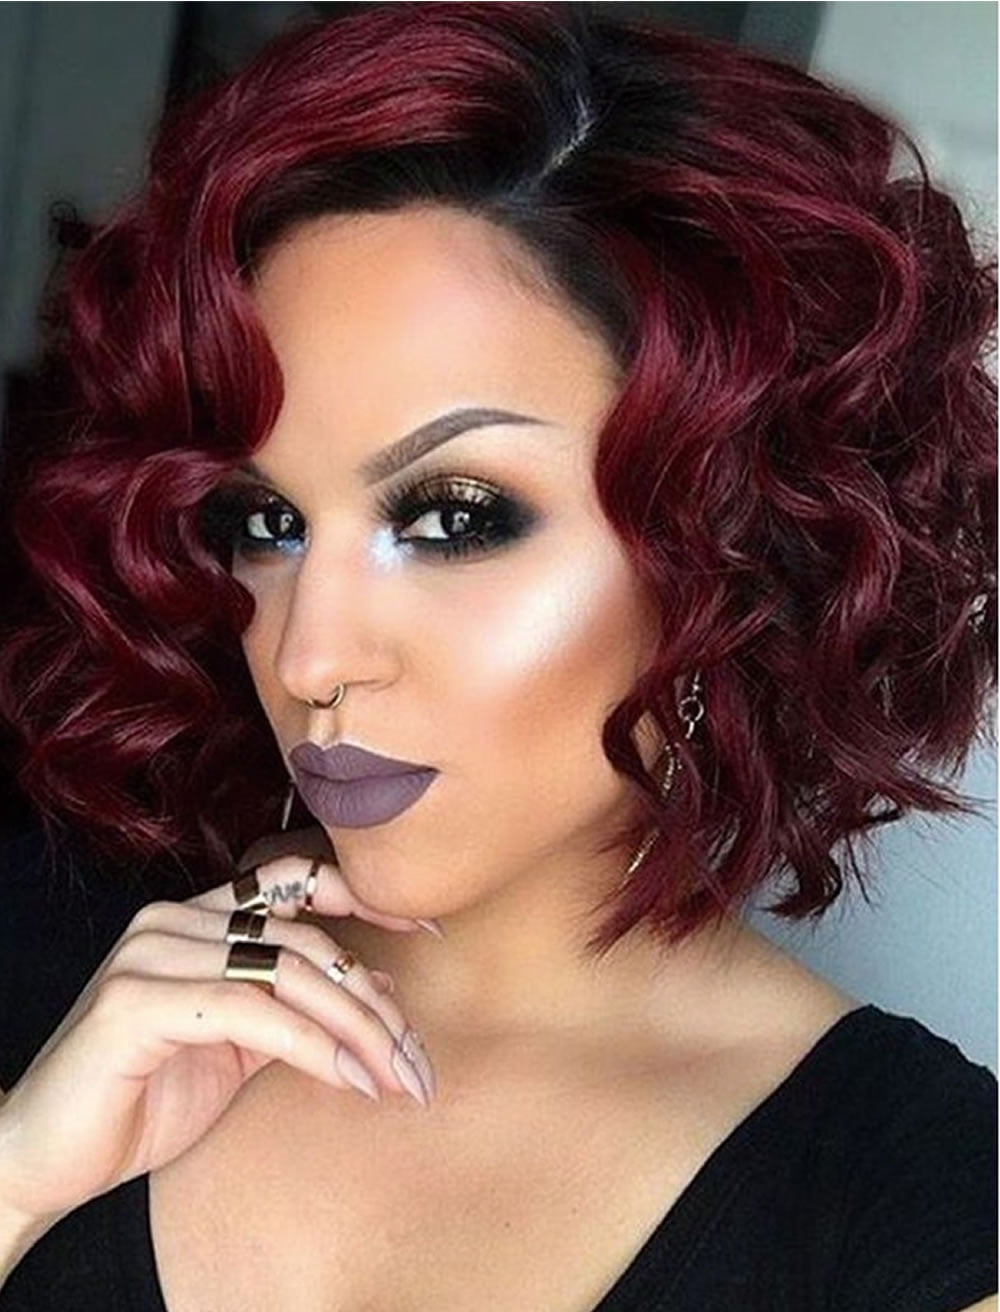 2020 Curly Bob Hairstyles for Women – 17 Perfect Short ...